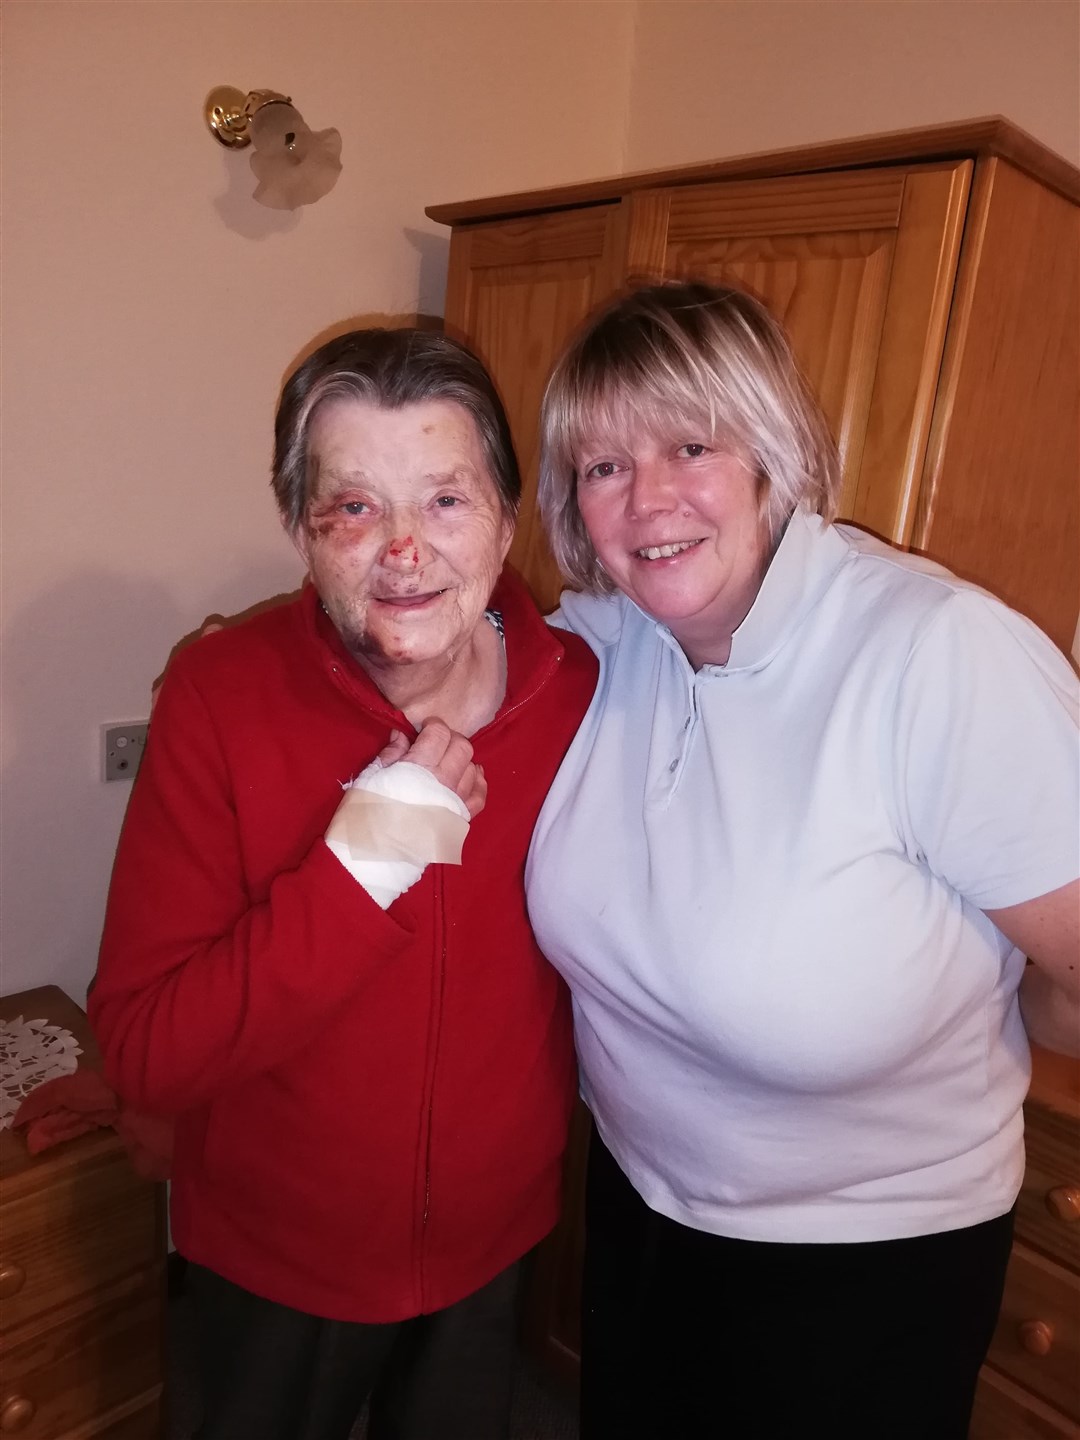 Denise and Catherine Marandola after the incident. Catherine, also known as Irene, has since moved to another care home.